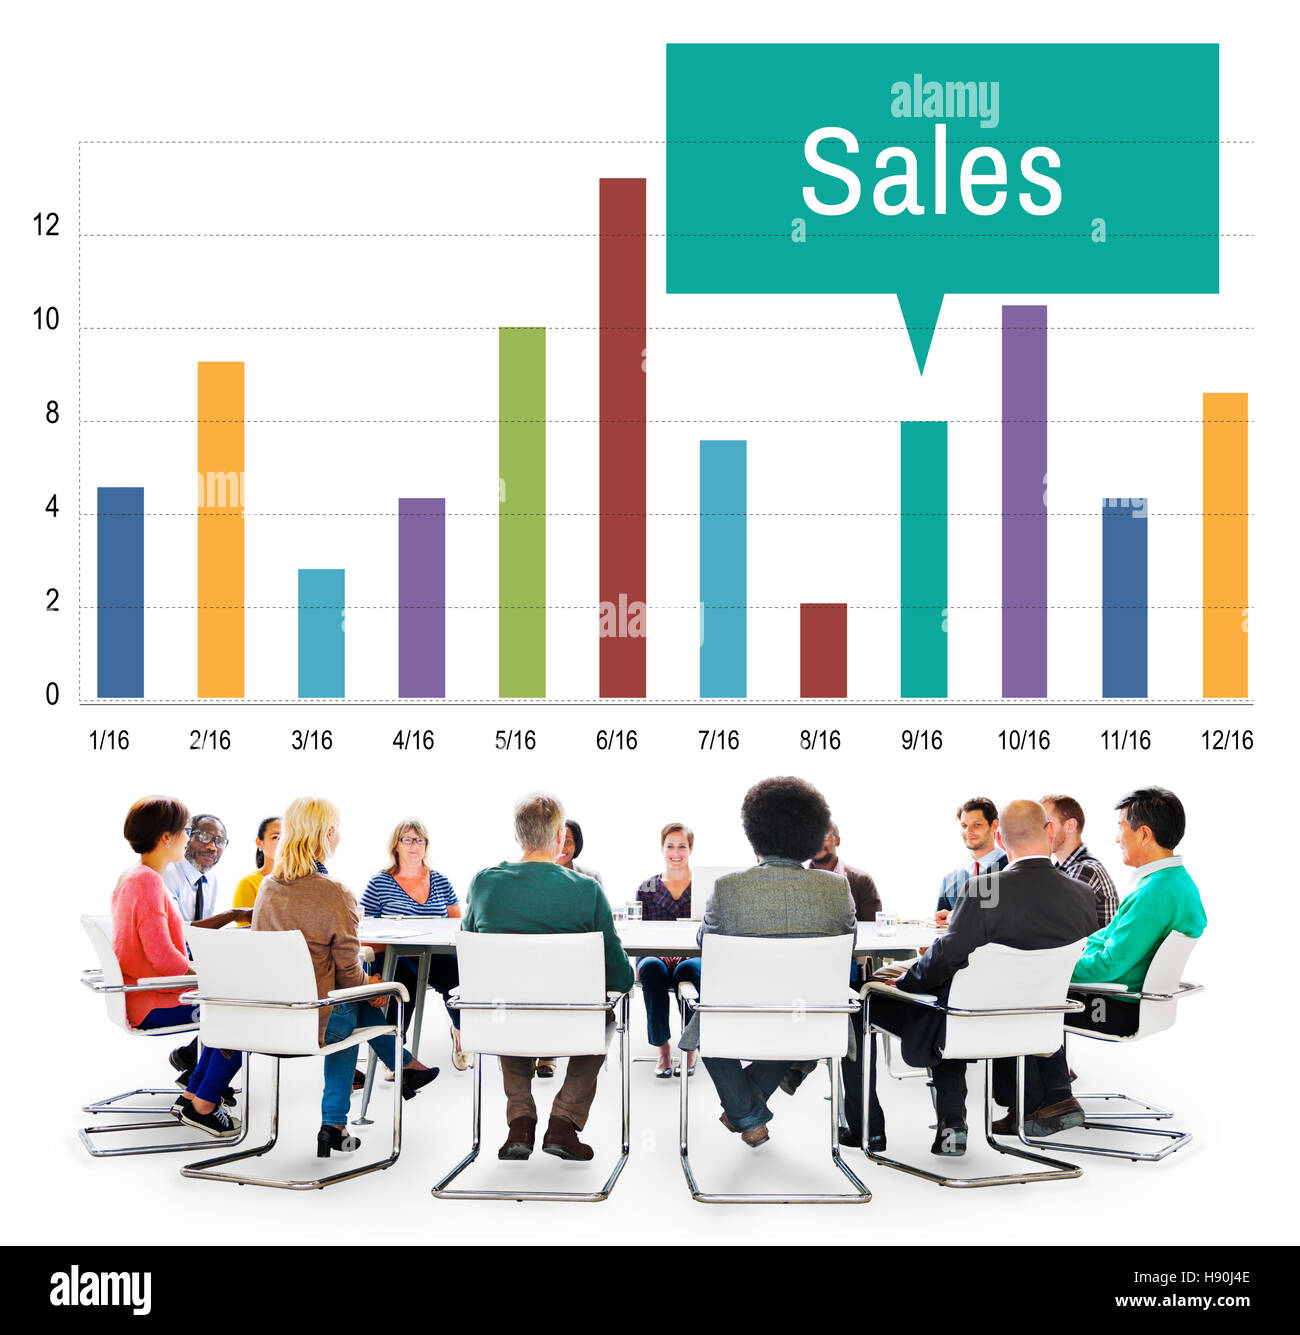 Sales Finance Selling Inventory Data Concept Stock Photo